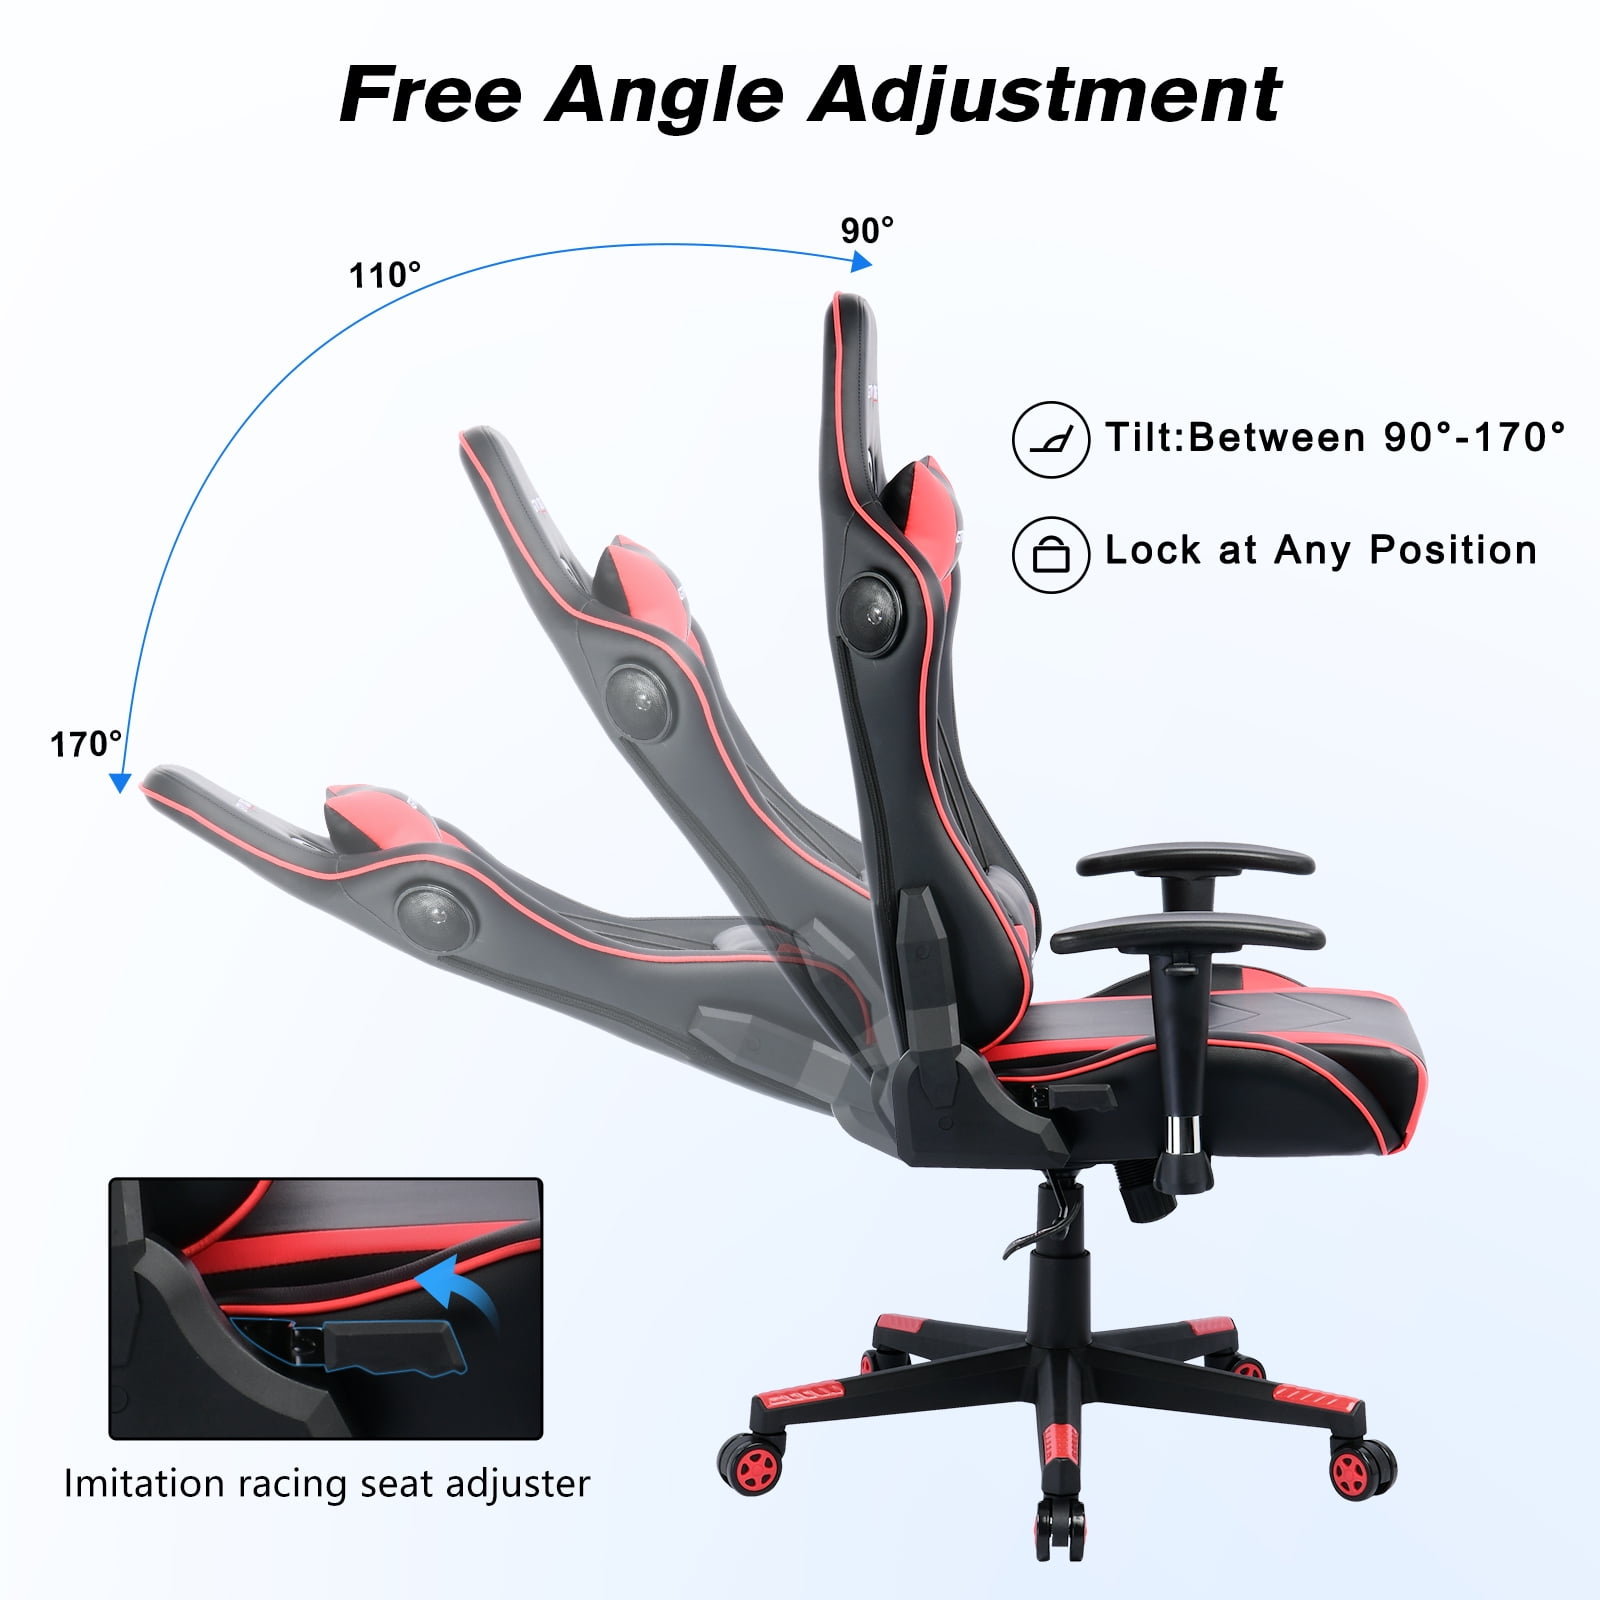  GTRACING Gaming Chair with Footrest and Bluetooth